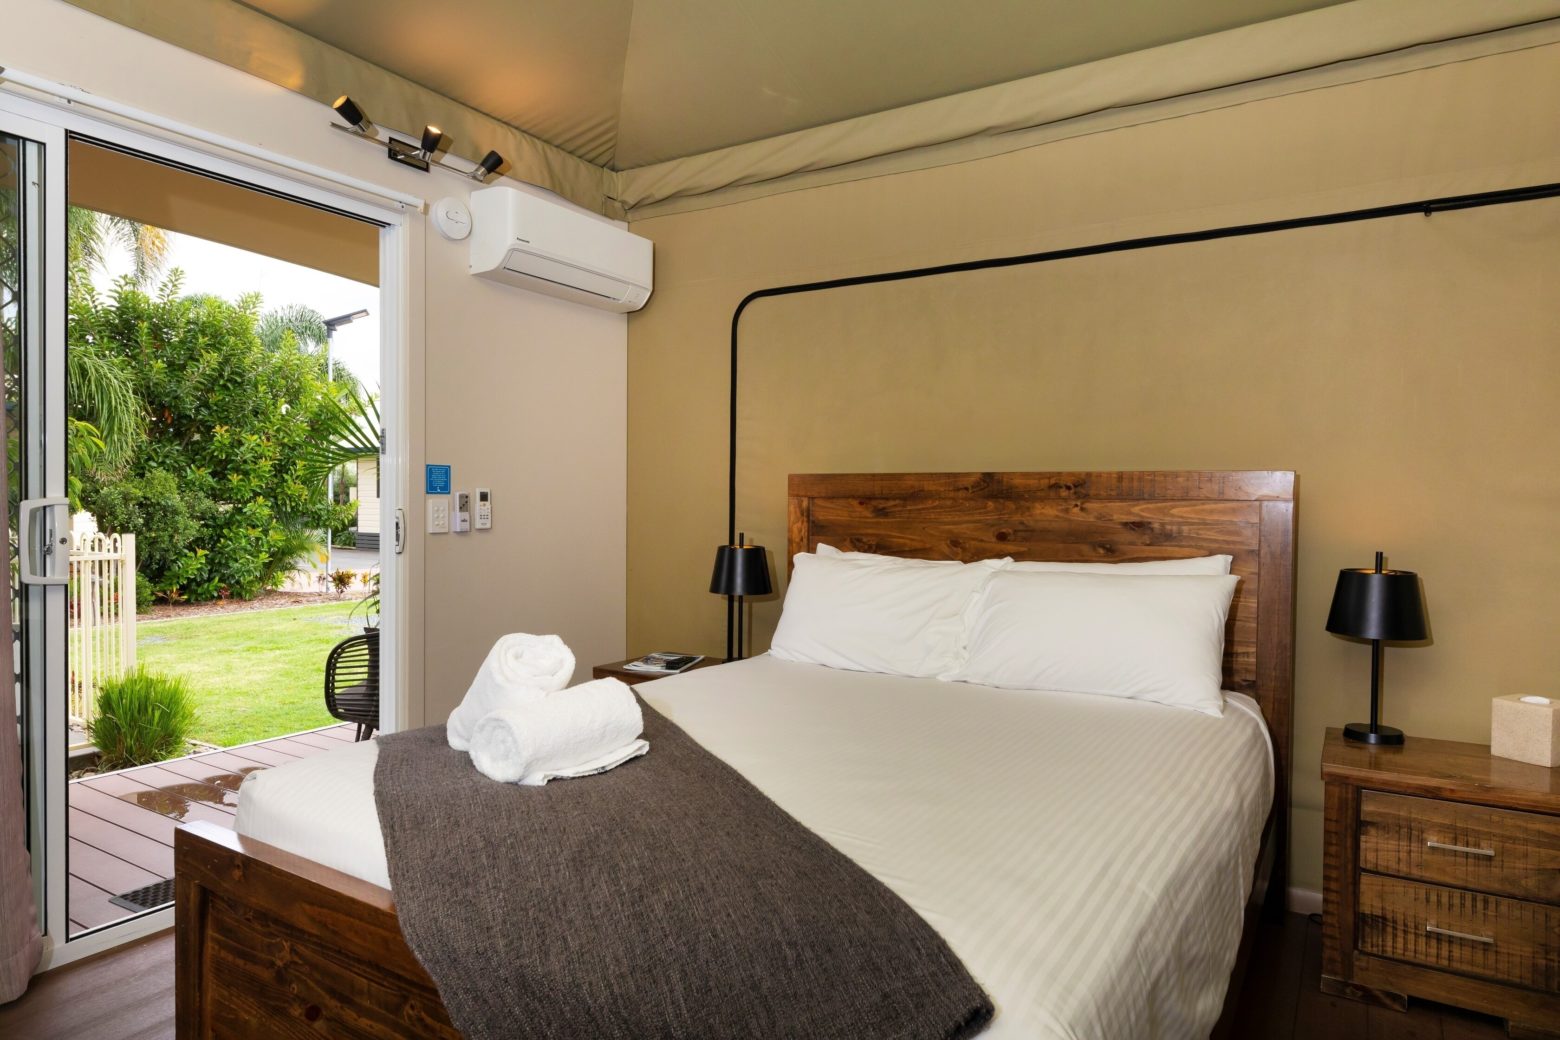 Glamping tent interior at NRMA Forster Tuncurry Holiday Park